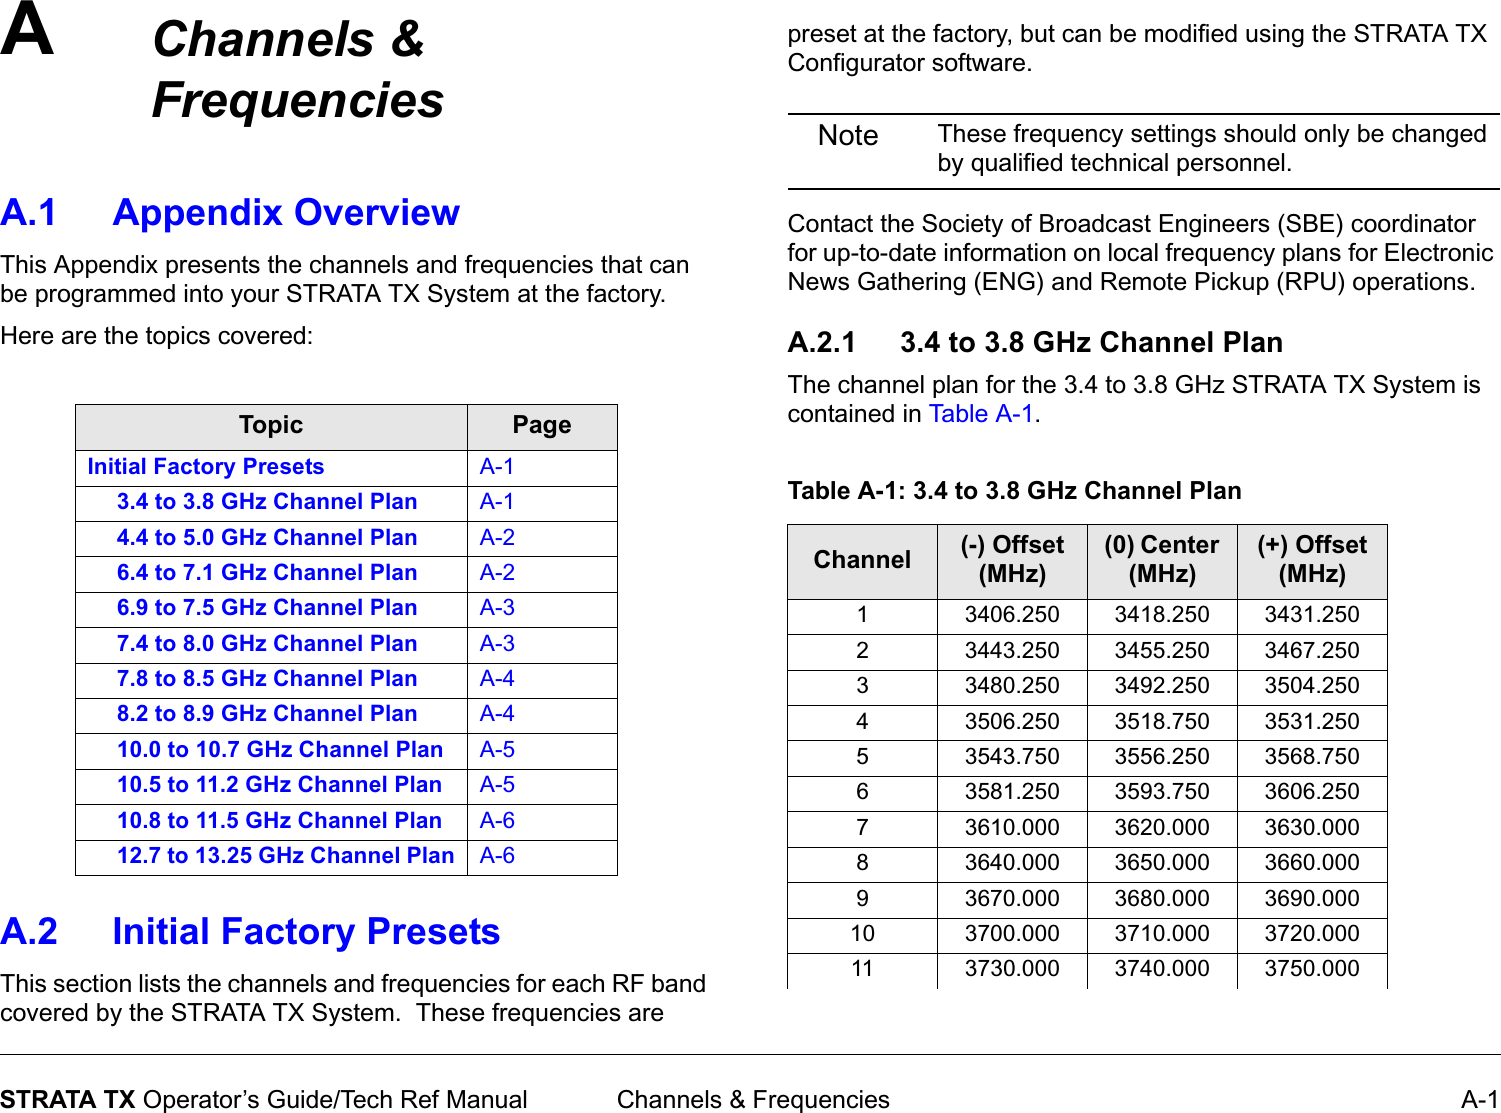 A Channels &amp; Frequencies A-1STRATA TX Operator’s Guide/Tech Ref ManualChannels &amp; Frequencies A.1 Appendix OverviewThis Appendix presents the channels and frequencies that can be programmed into your STRATA TX System at the factory.Here are the topics covered:A.2 Initial Factory PresetsThis section lists the channels and frequencies for each RF band covered by the STRATA TX System.  These frequencies are Topic PageInitial Factory Presets A-13.4 to 3.8 GHz Channel Plan A-14.4 to 5.0 GHz Channel Plan A-26.4 to 7.1 GHz Channel Plan A-26.9 to 7.5 GHz Channel Plan A-37.4 to 8.0 GHz Channel Plan A-37.8 to 8.5 GHz Channel Plan A-48.2 to 8.9 GHz Channel Plan A-410.0 to 10.7 GHz Channel Plan A-510.5 to 11.2 GHz Channel Plan A-510.8 to 11.5 GHz Channel Plan A-612.7 to 13.25 GHz Channel Plan A-6preset at the factory, but can be modified using the STRATA TX Configurator software.Note  These frequency settings should only be changed by qualified technical personnel.Contact the Society of Broadcast Engineers (SBE) coordinator for up-to-date information on local frequency plans for Electronic News Gathering (ENG) and Remote Pickup (RPU) operations.A.2.1 3.4 to 3.8 GHz Channel PlanThe channel plan for the 3.4 to 3.8 GHz STRATA TX System is contained in Tab le  A - 1.Table A-1: 3.4 to 3.8 GHz Channel PlanChannel (-) Offset (MHz)(0) Center (MHz)(+) Offset (MHz)1 3406.250 3418.250 3431.2502 3443.250 3455.250 3467.2503 3480.250 3492.250 3504.2504 3506.250 3518.750 3531.2505 3543.750 3556.250 3568.7506 3581.250 3593.750 3606.2507 3610.000 3620.000 3630.0008 3640.000 3650.000 3660.0009 3670.000 3680.000 3690.00010 3700.000 3710.000 3720.00011 3730.000 3740.000 3750.000